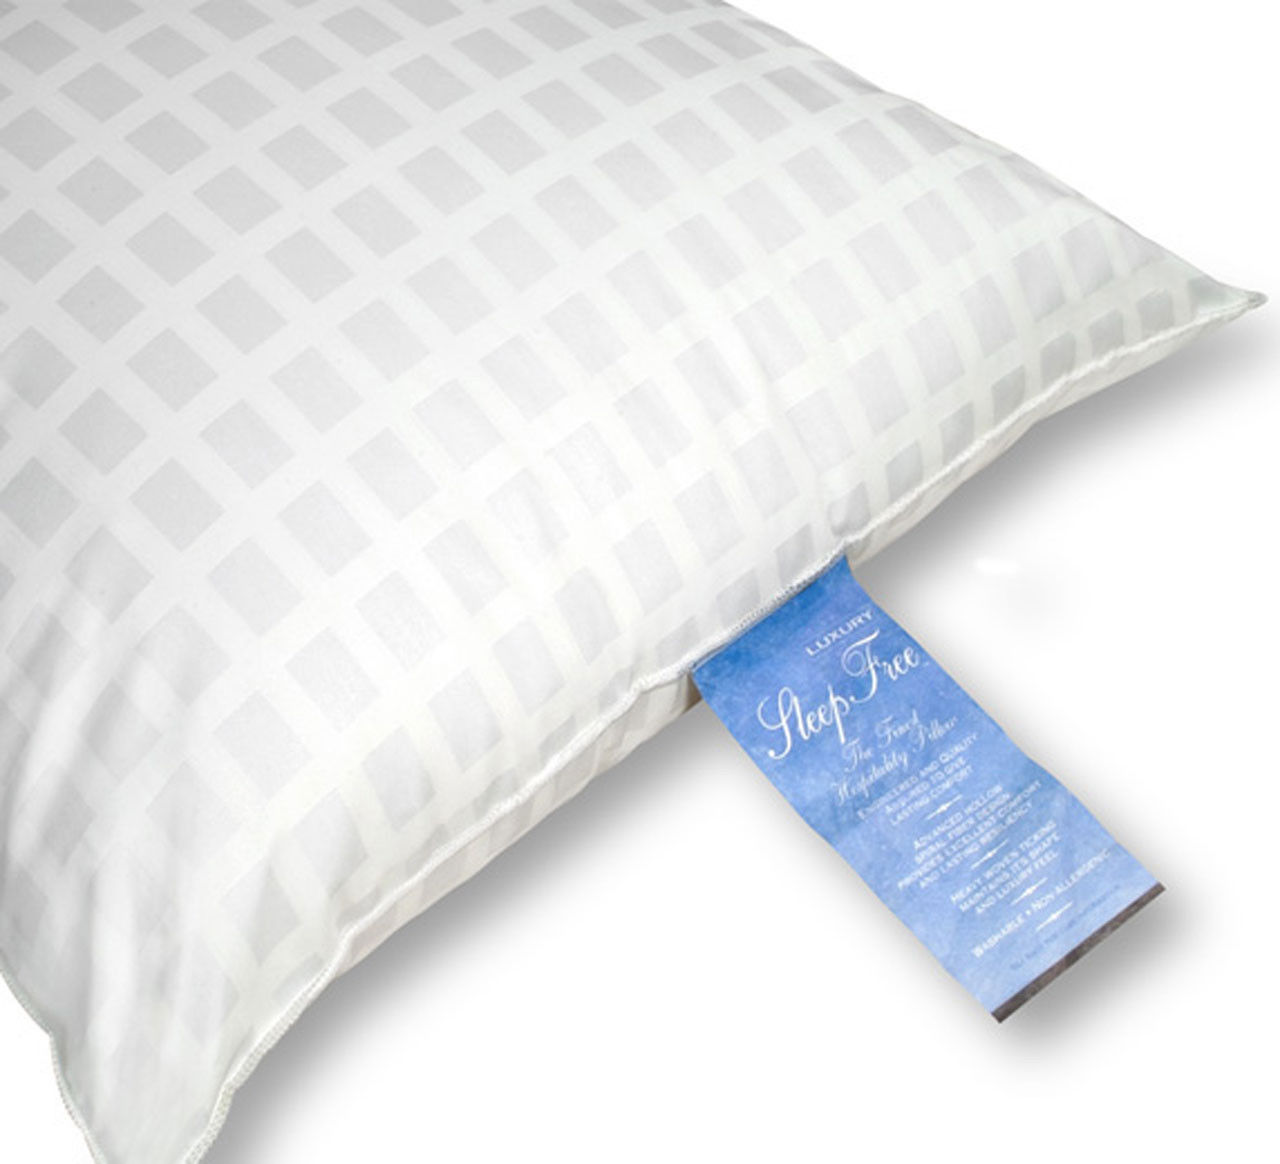 In what manner is the Sleep Free Pillow presented when packaged, including the free pillow?